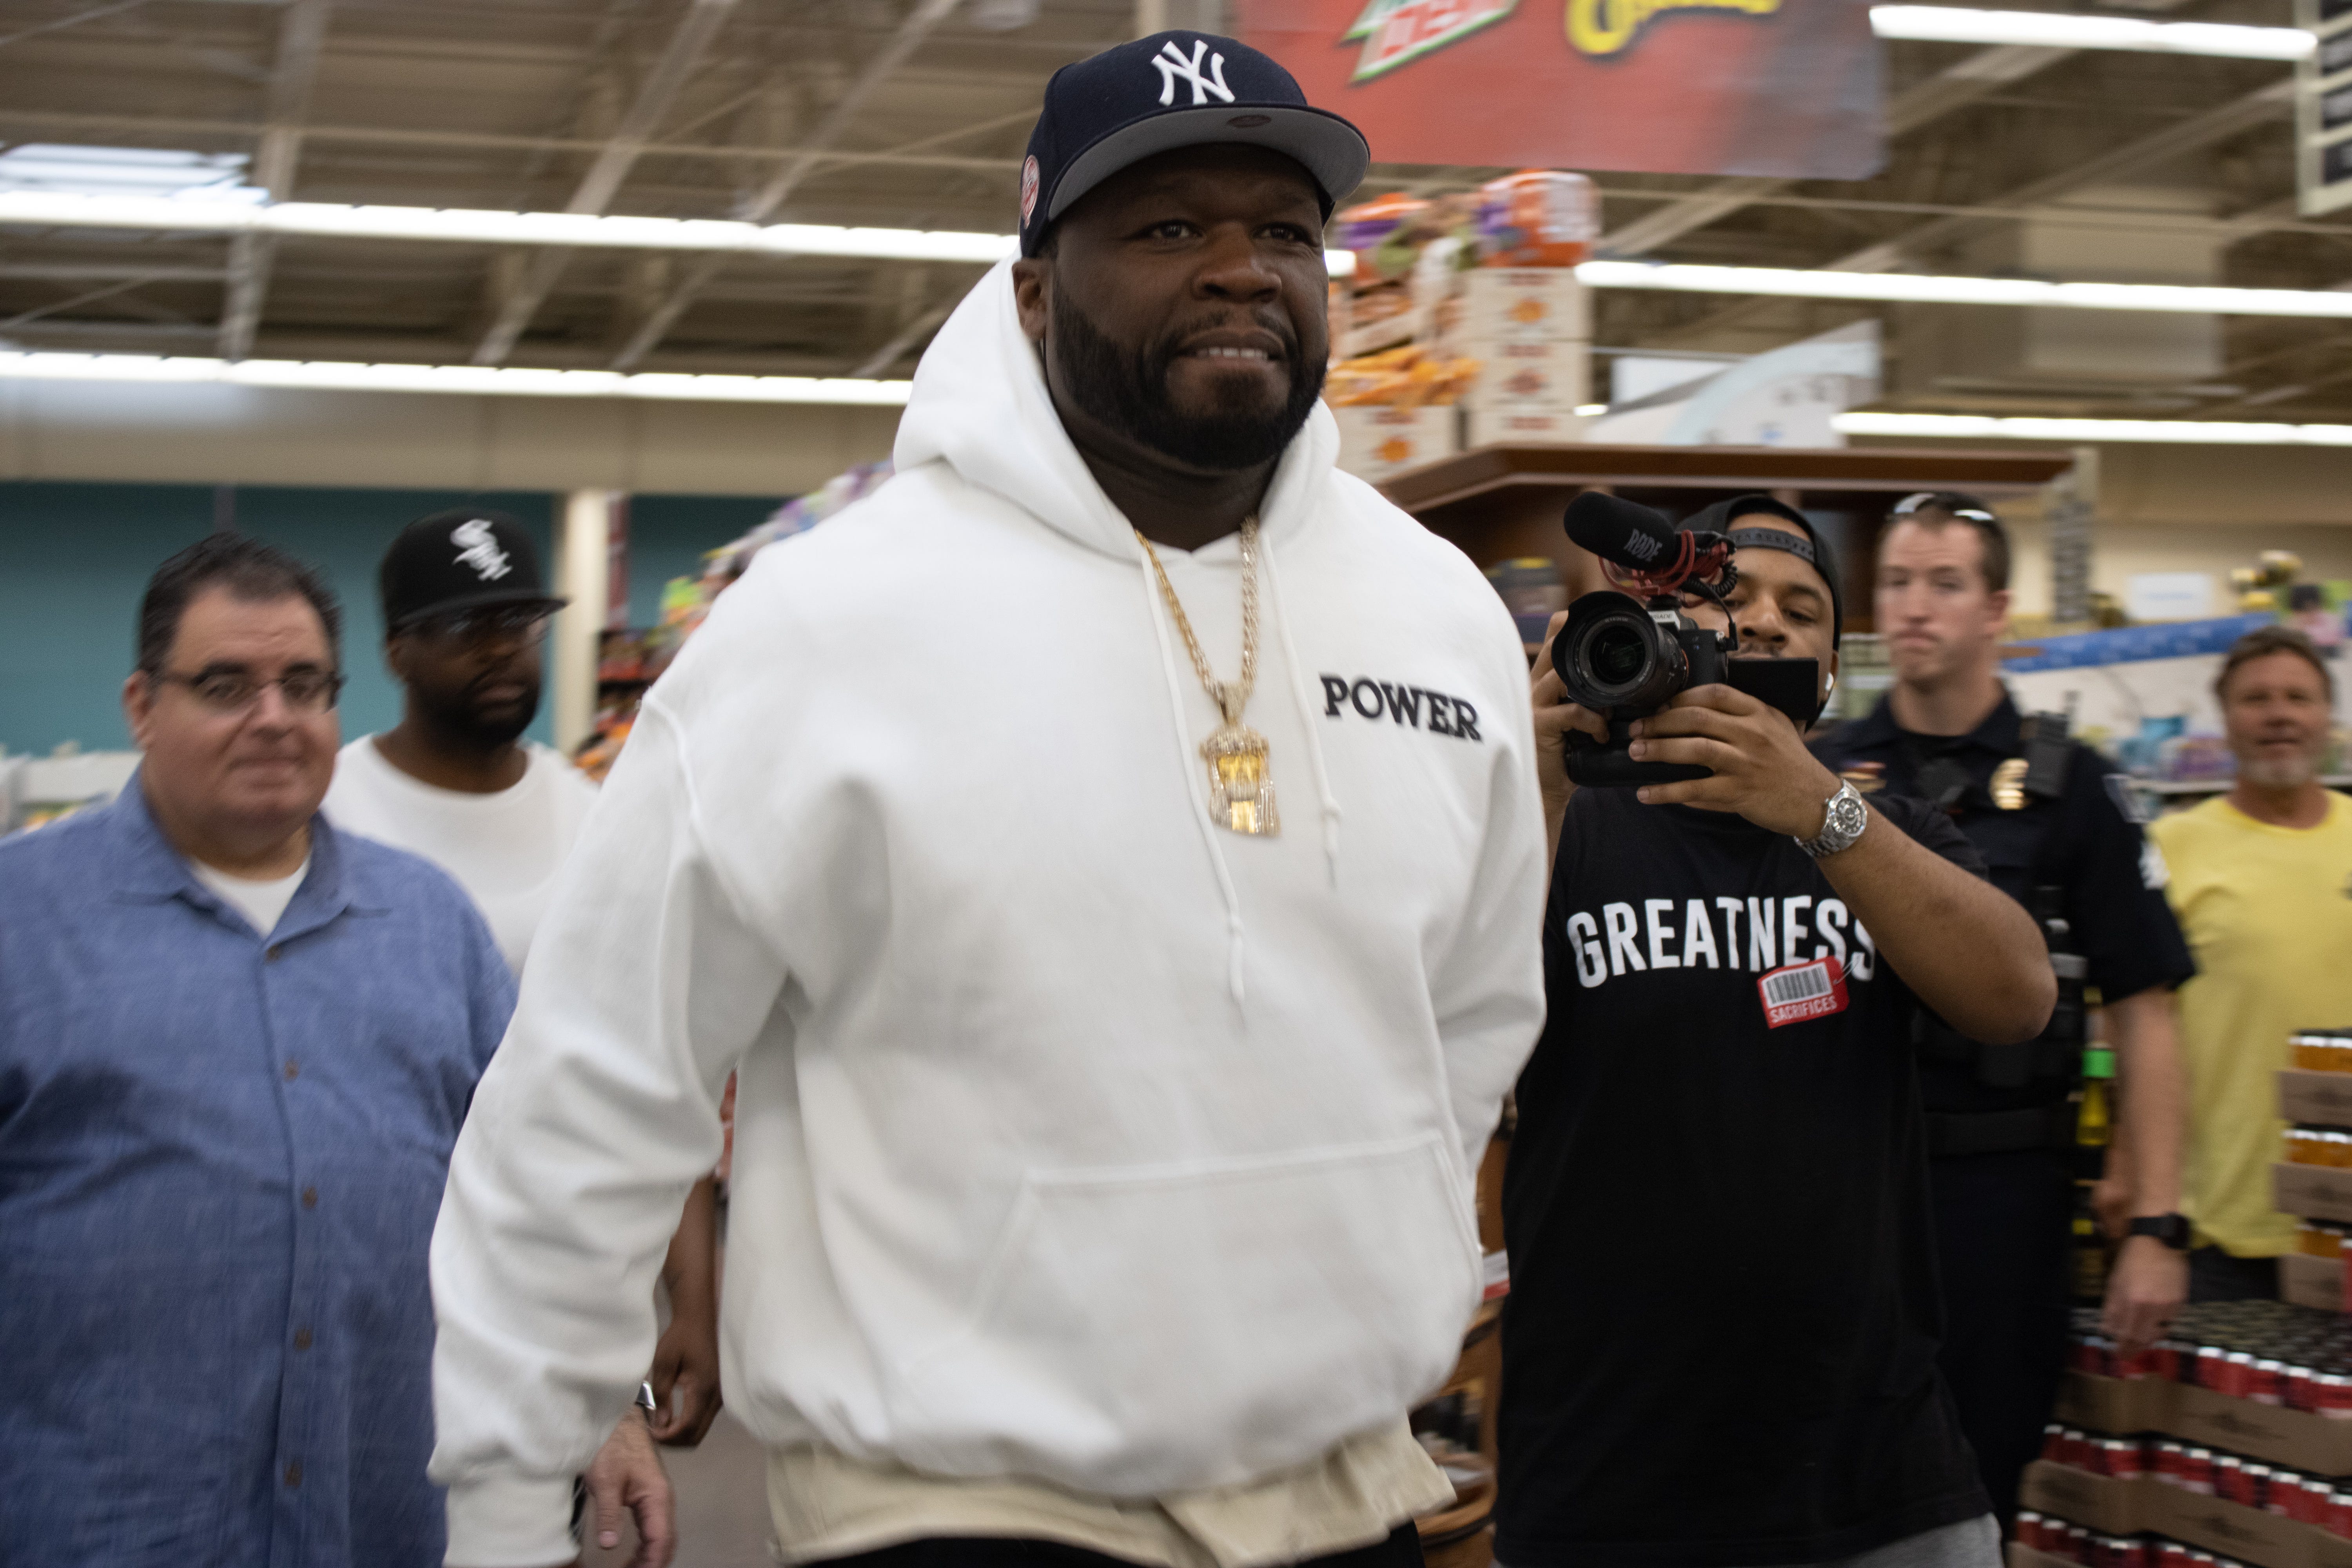 50 Cent meets fans in Coralville Hy-Vee as part of promotional tour